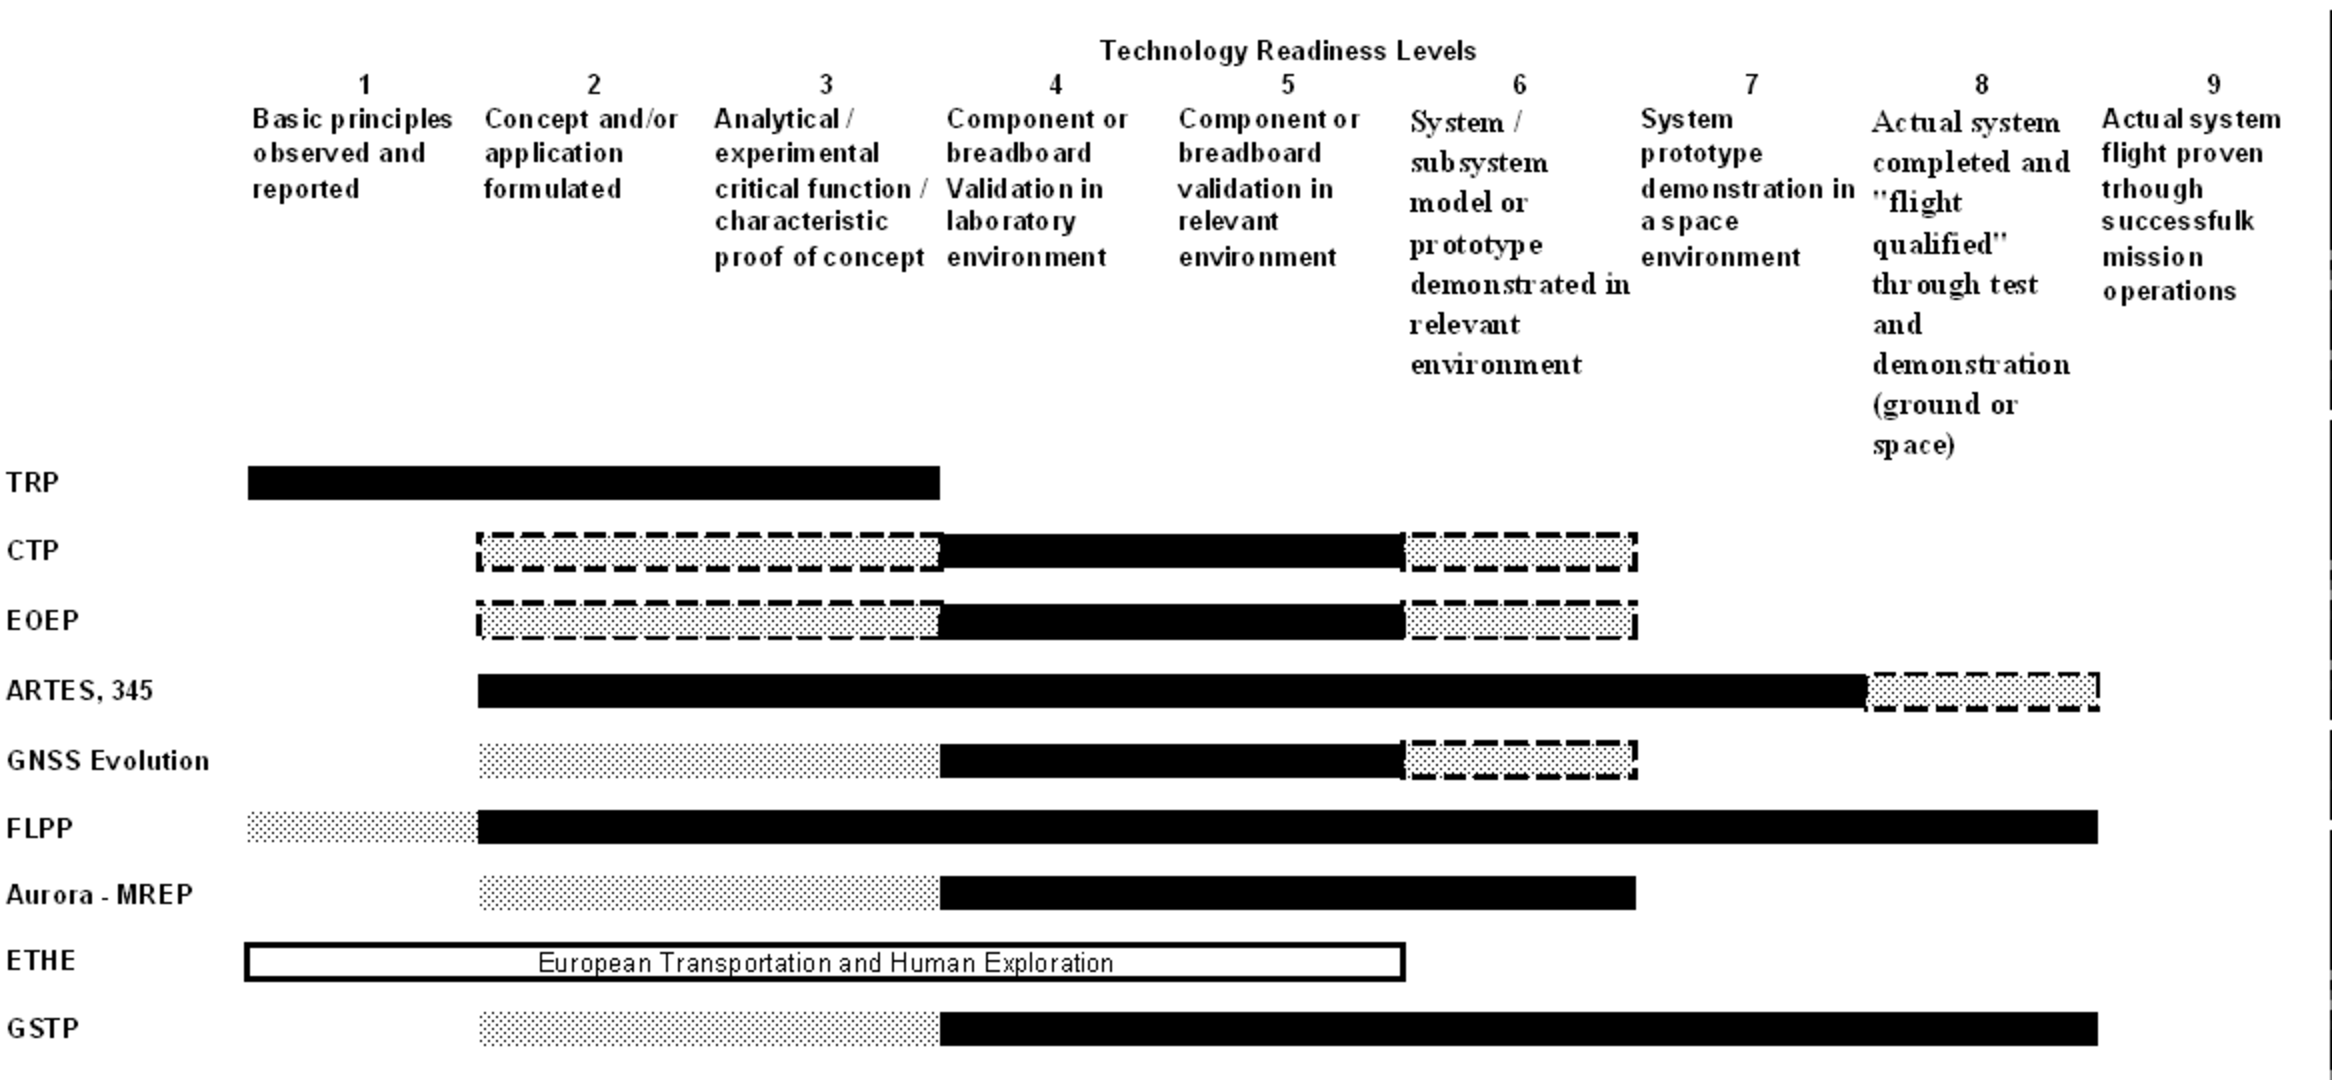 ESA Technology programmes and Technical Readiness Levels (RTL) scale